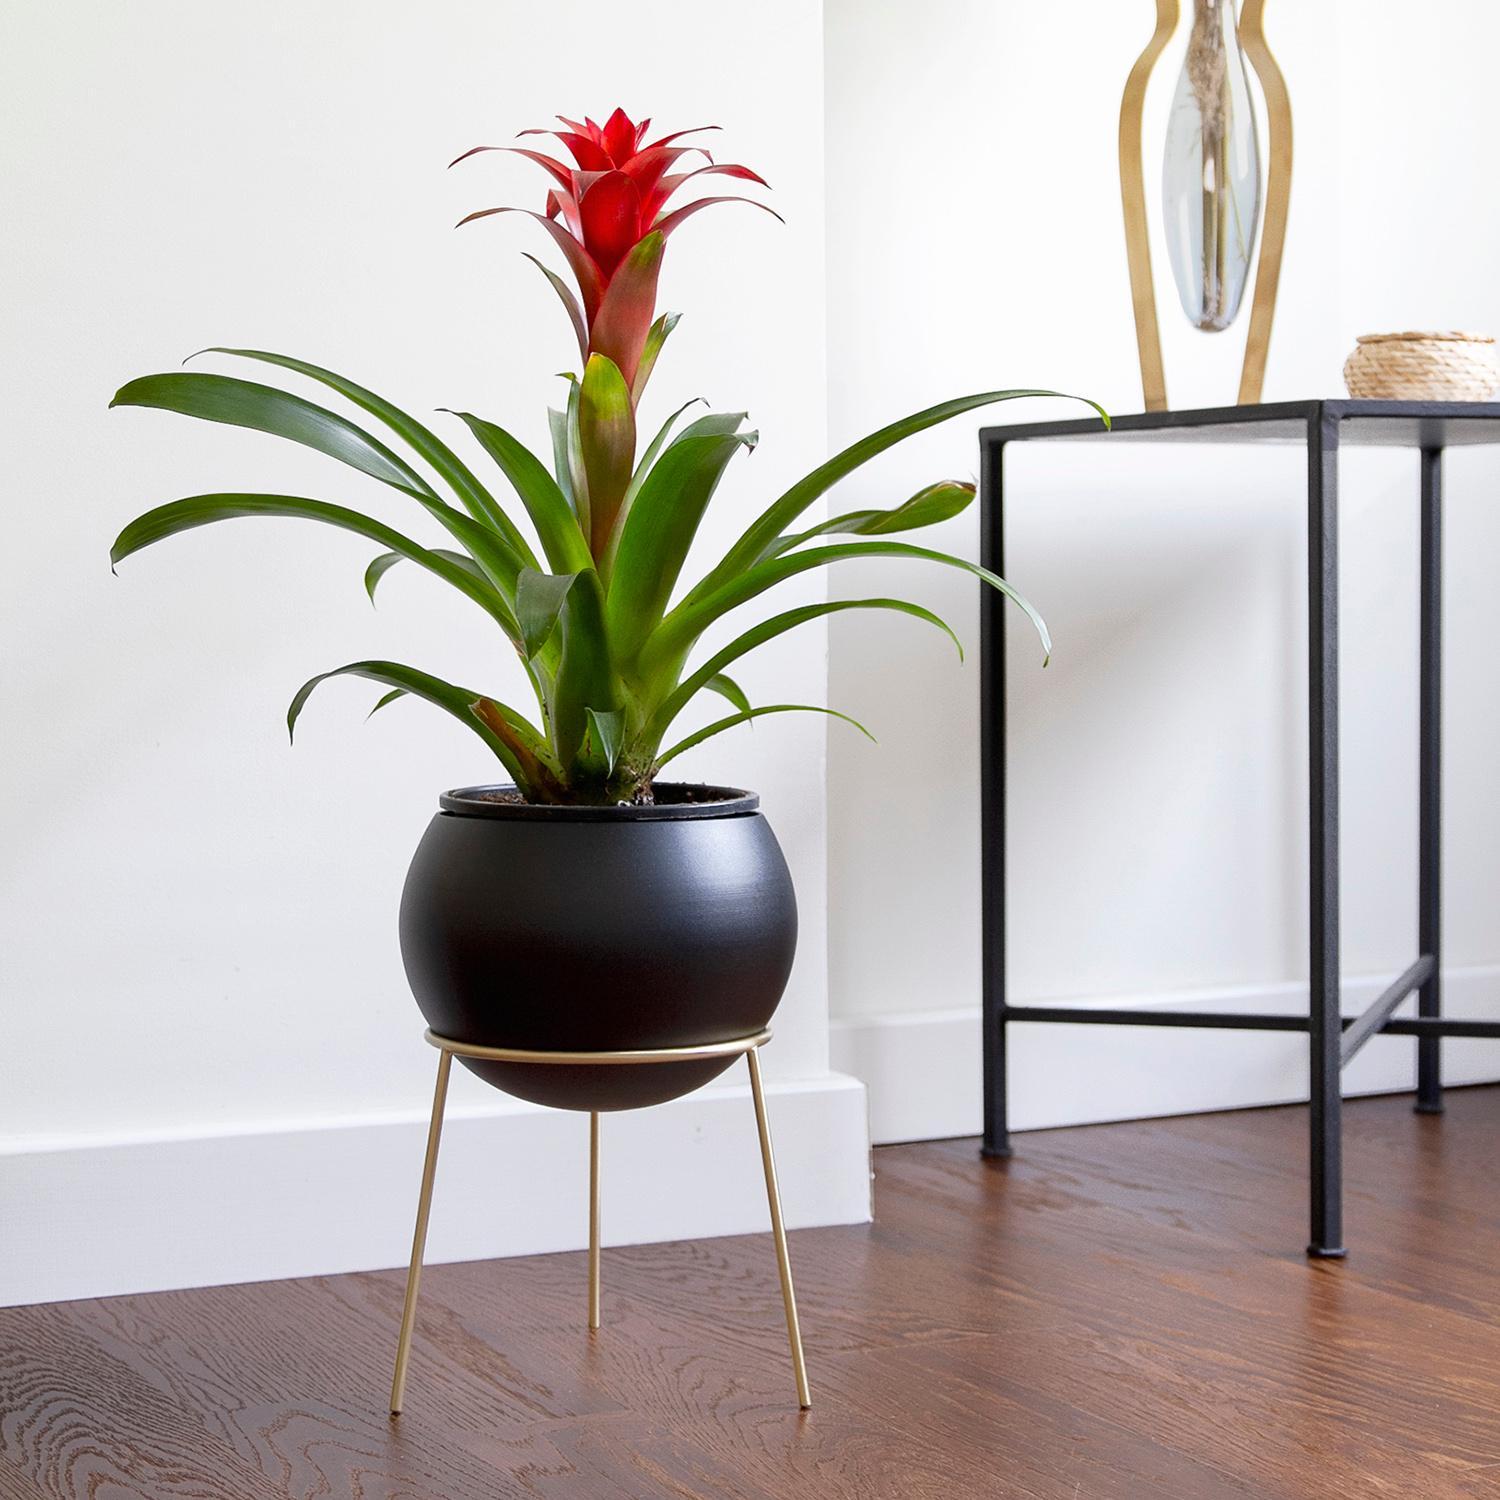 Globe is a planter collection inspired by the plants' search of sun, growth to sun in nature. Its name comes from our blue planet which it represents; Globe.

As being able to rotate to any direction on its brass stand, Globe Planter lets you